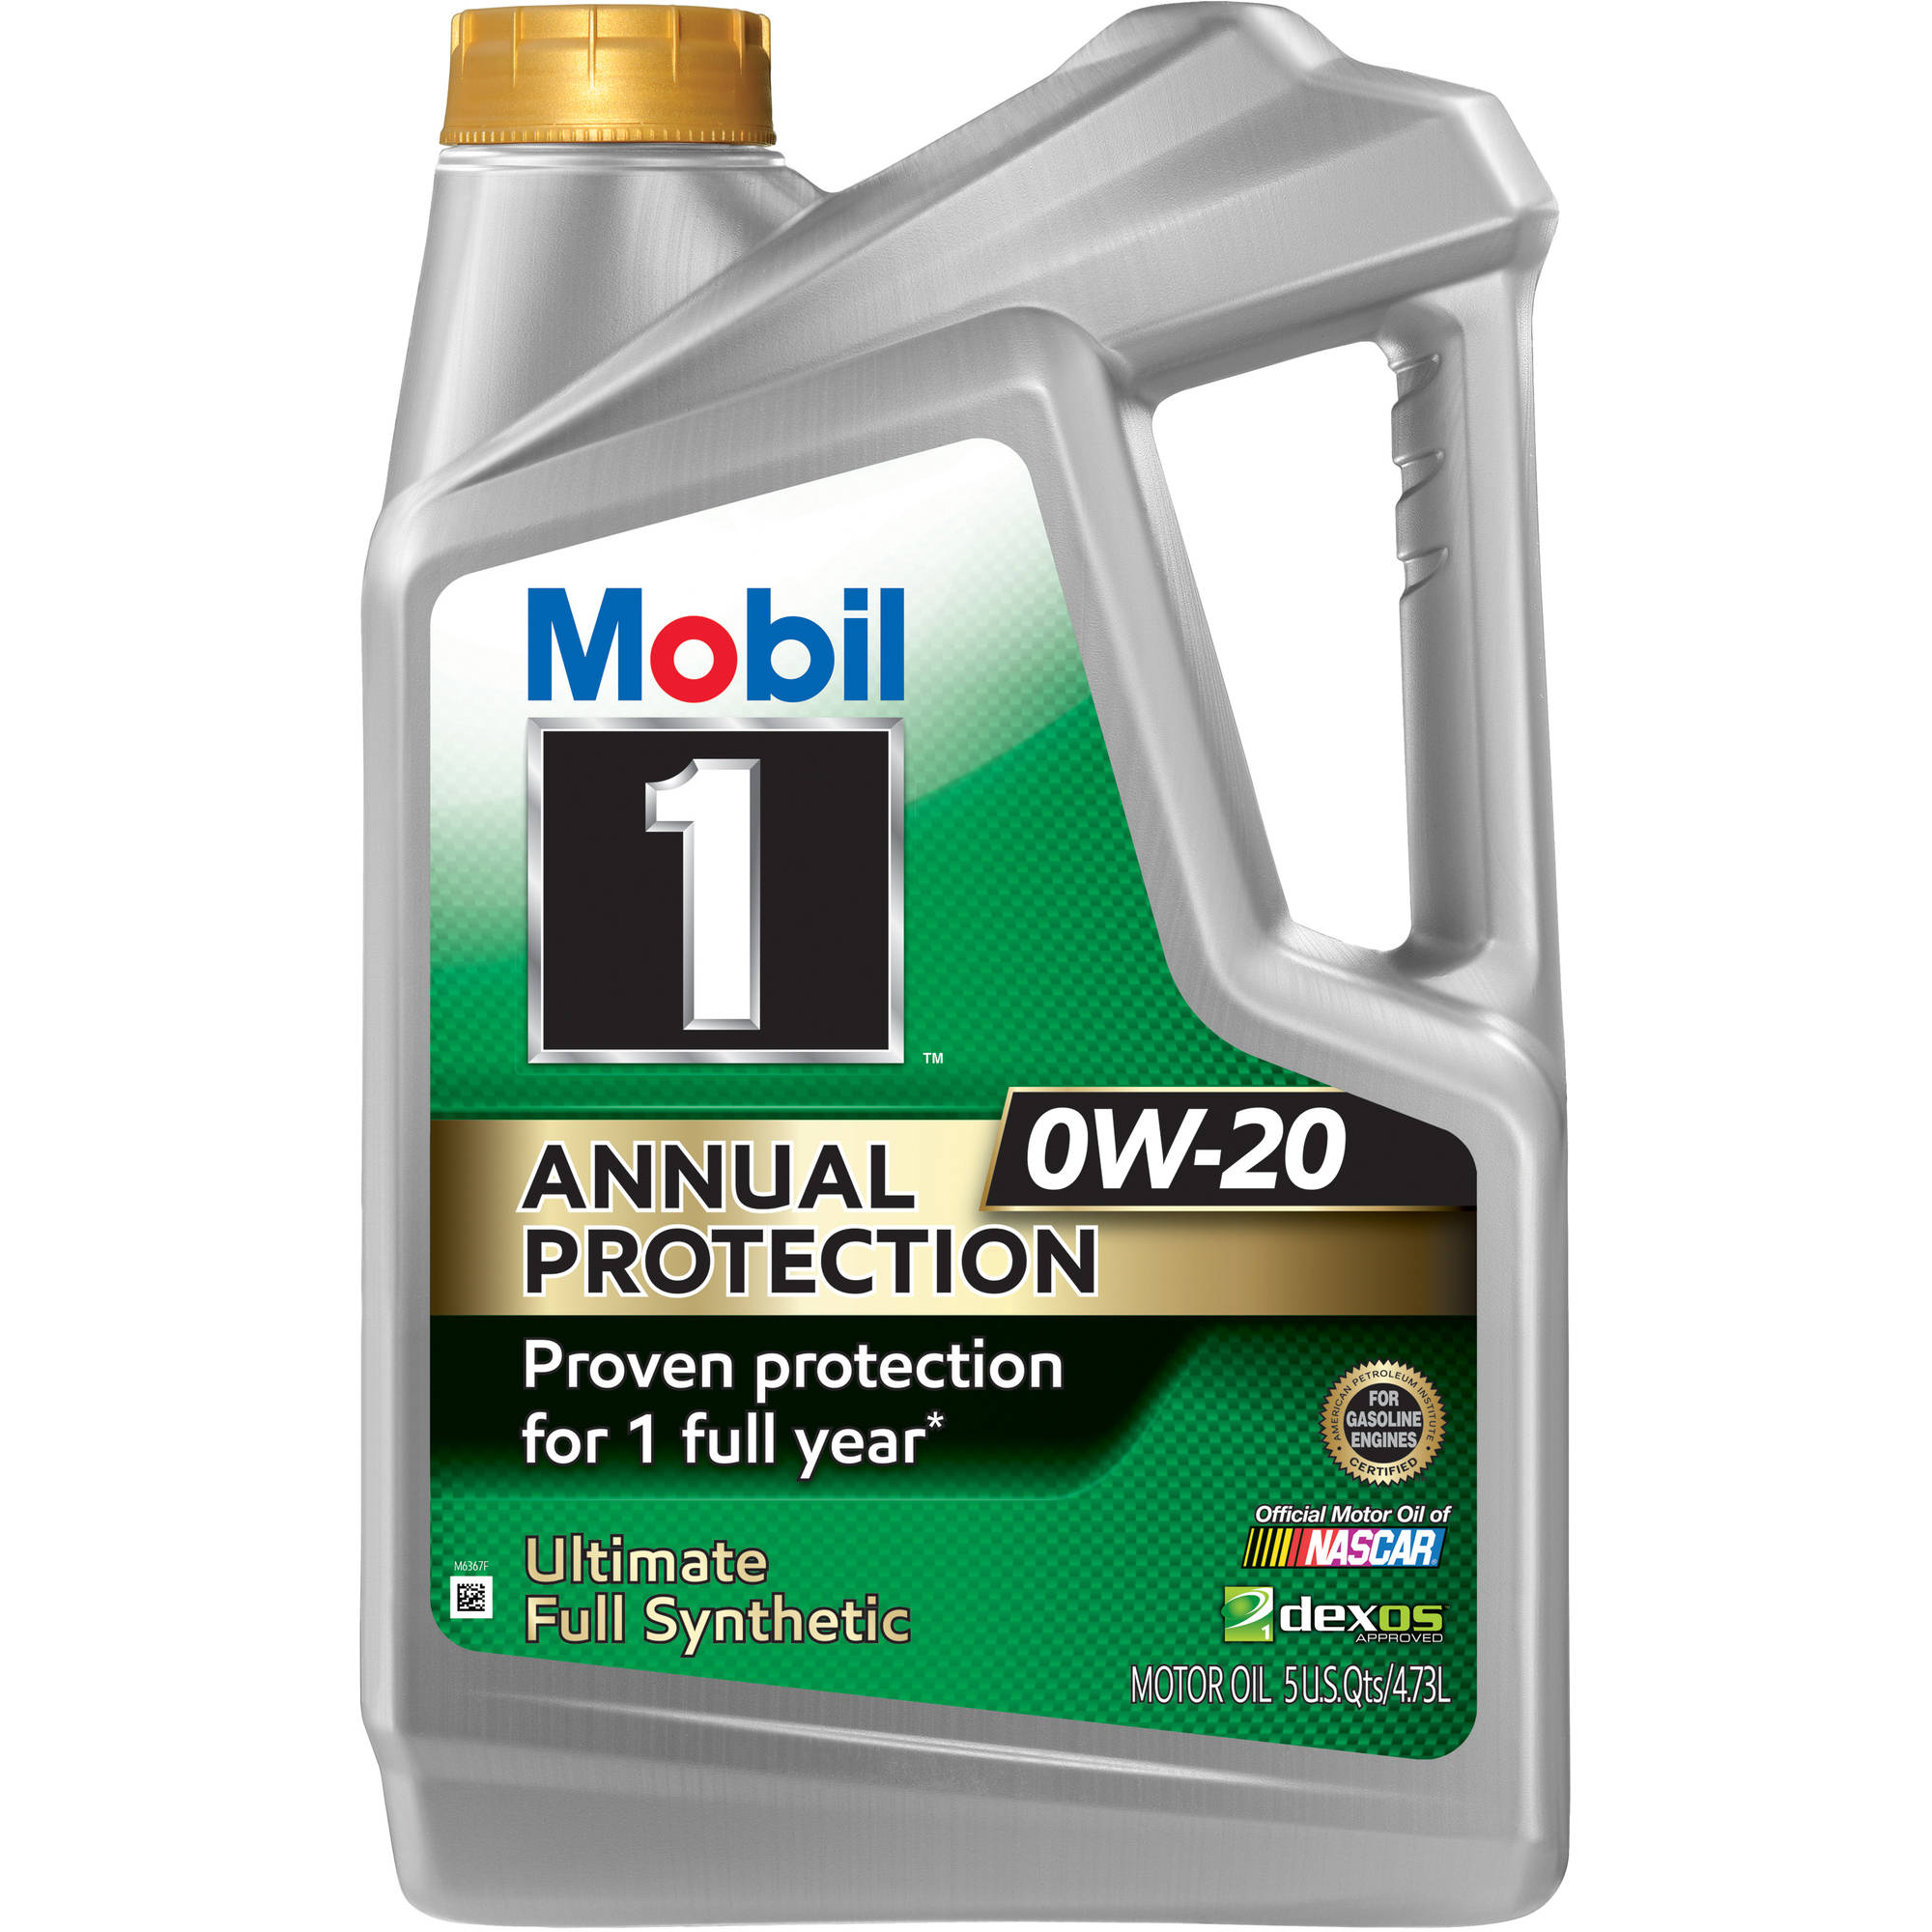 Mobil 1 Annual Protection 0W-20